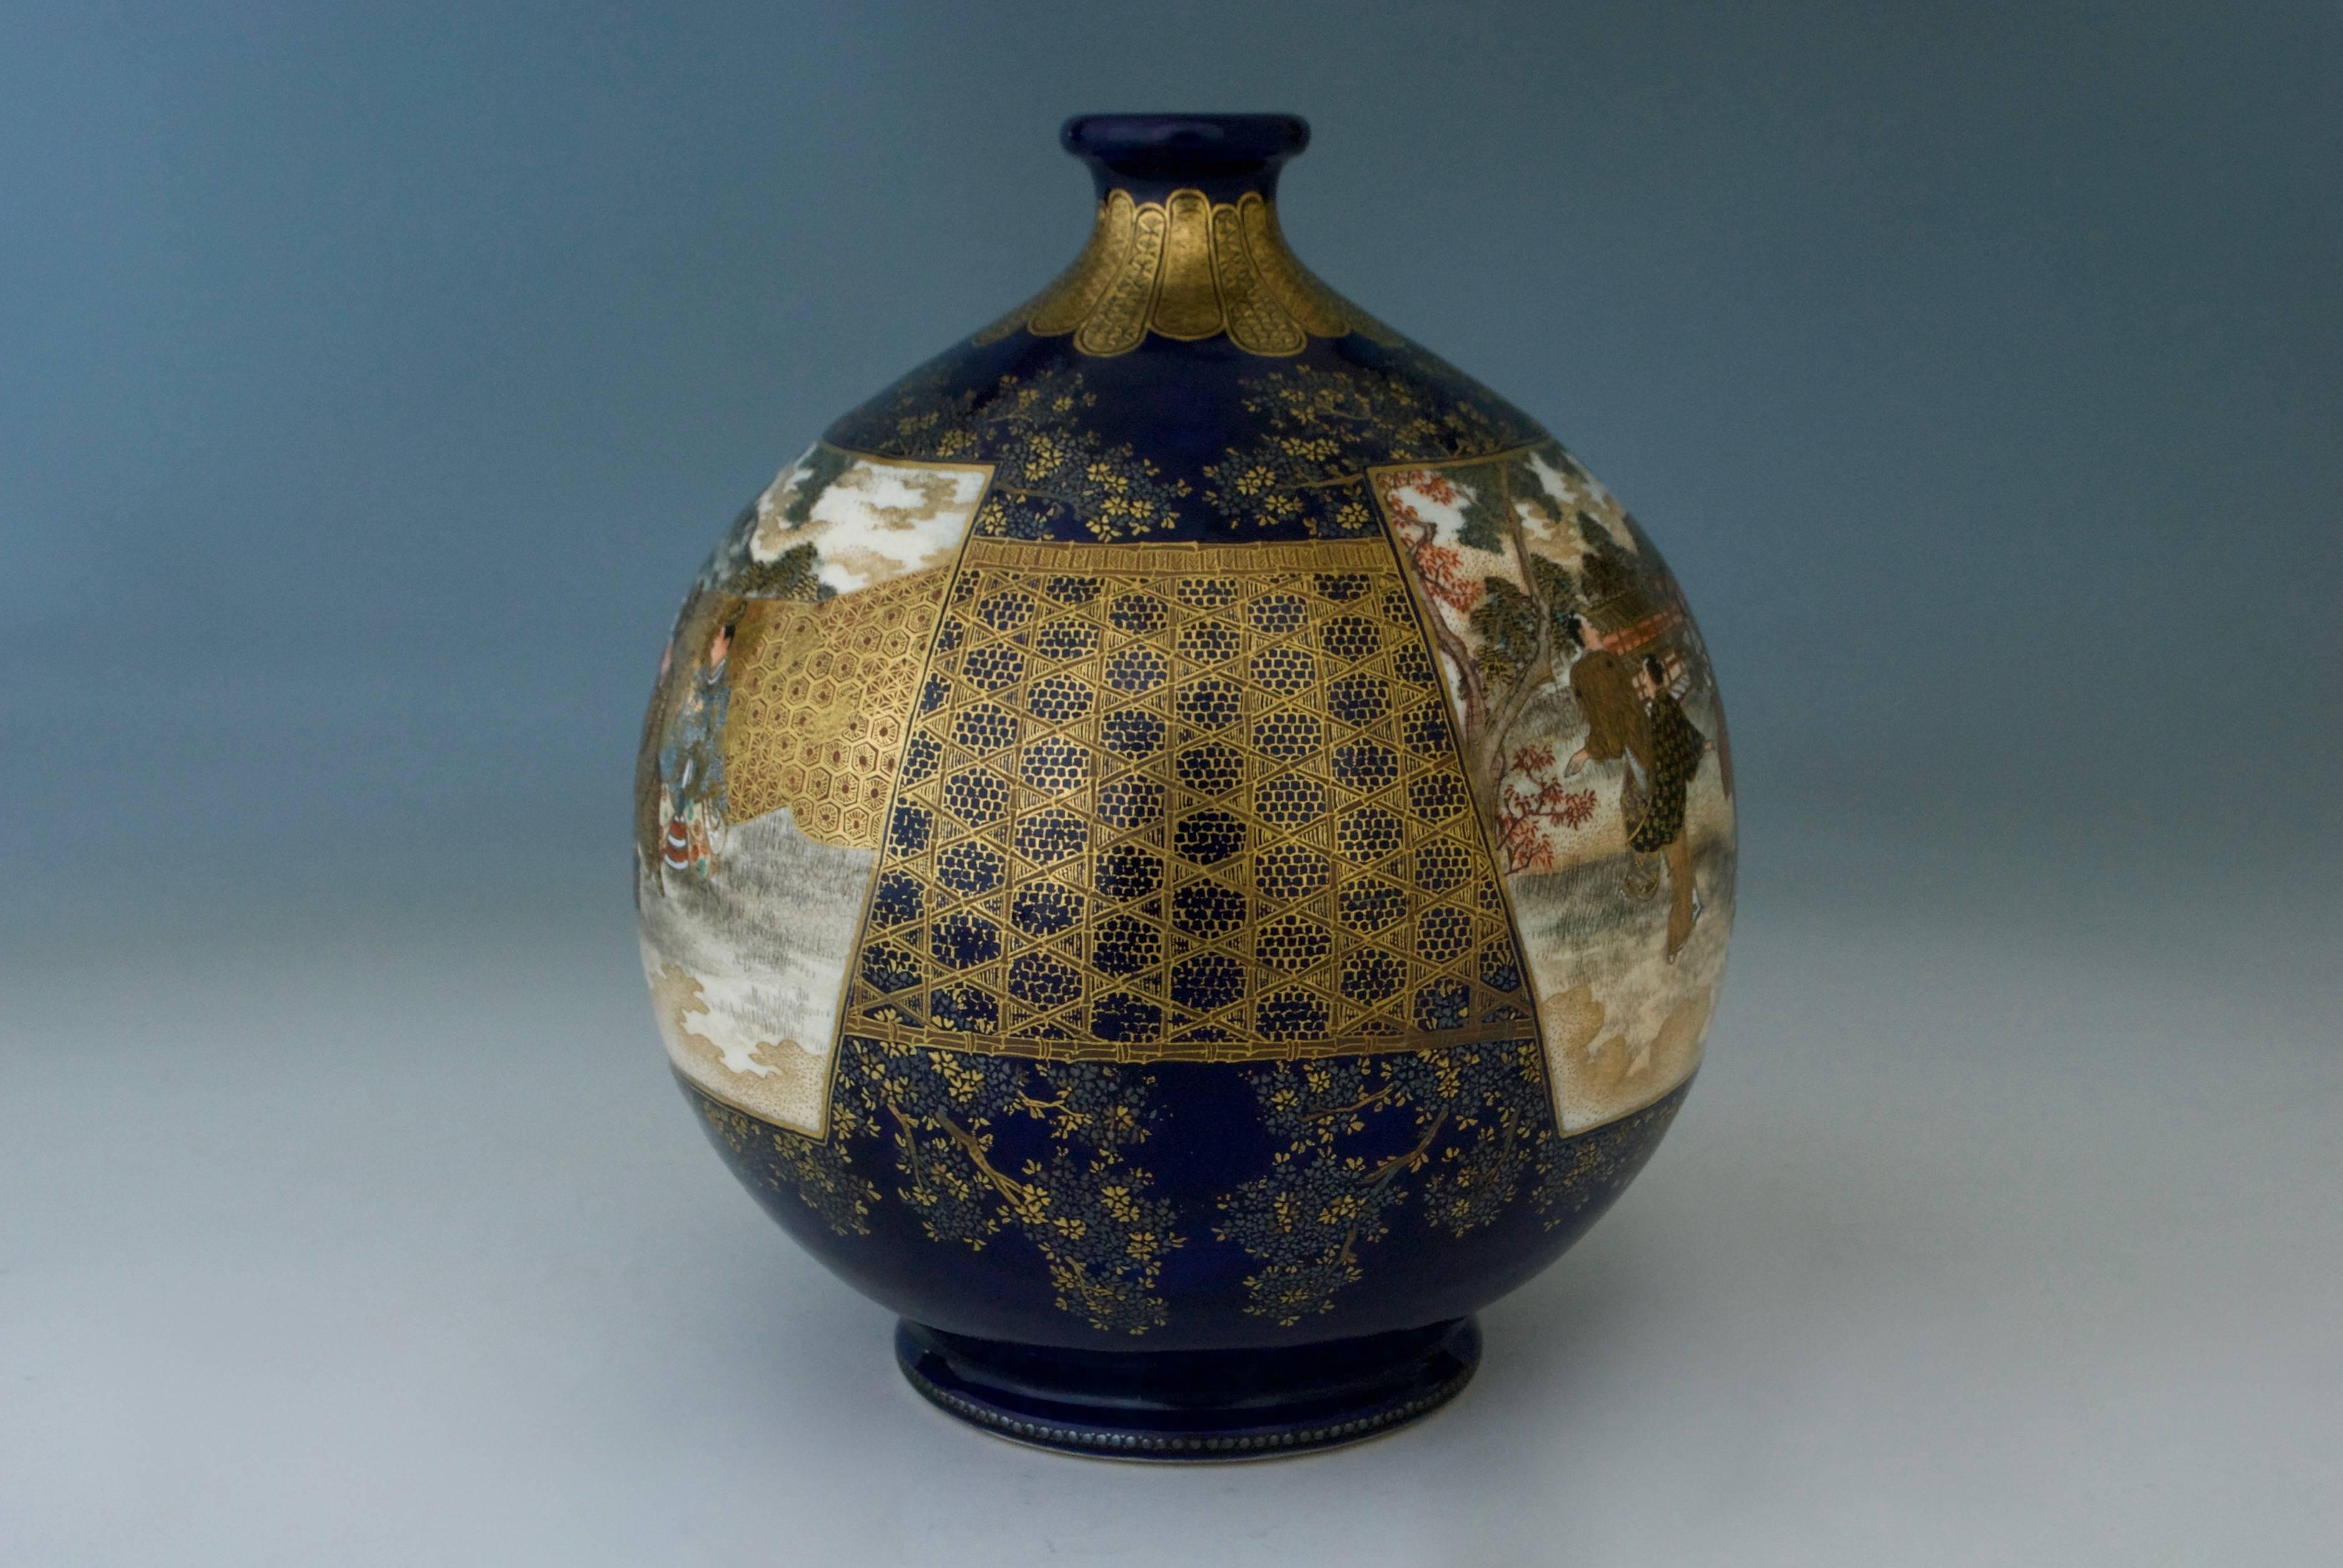 A Japanese globular shape Satsuma vase with two panels, one featuring Japanese people dancing in a landscape, the other of some samurai watching them, all reserved on a dark cobalt blue ground enriched with silver and gilt flowers and honeycomb